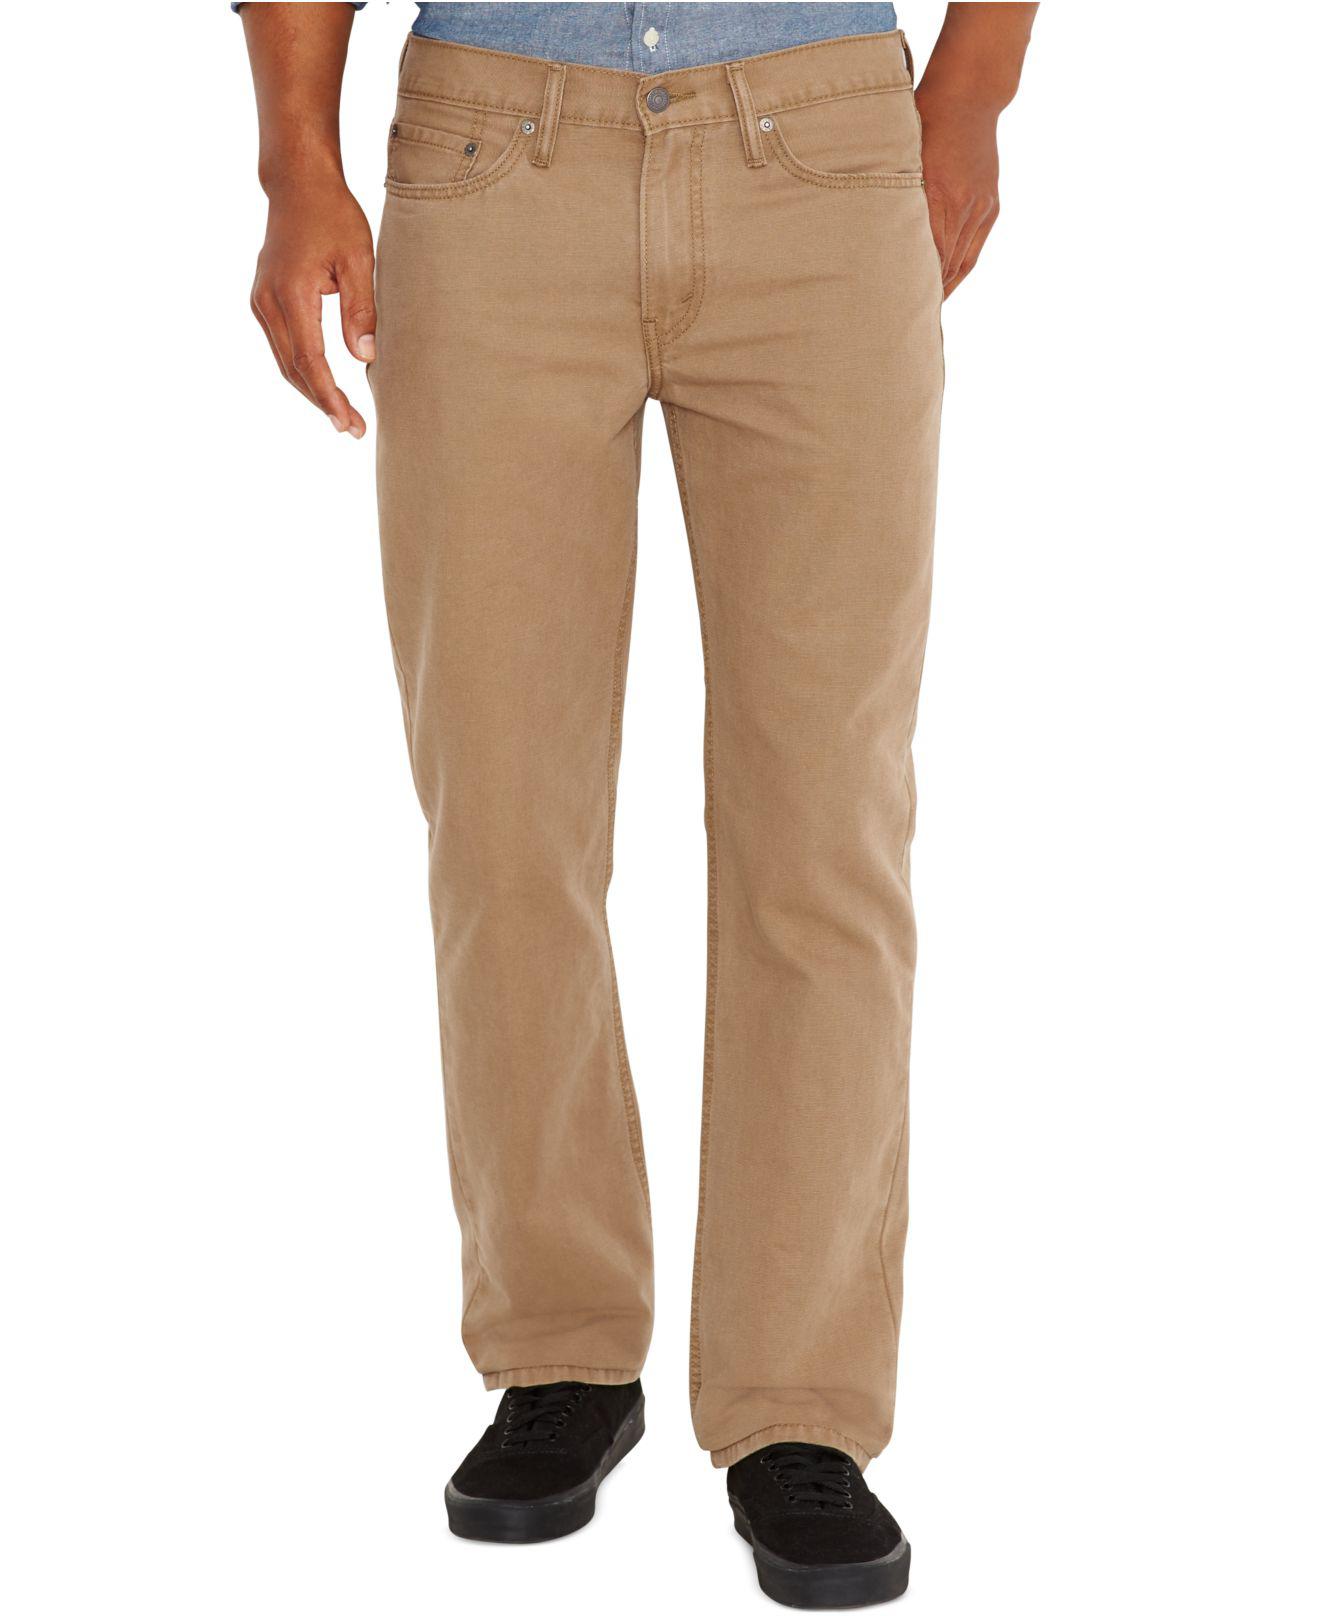 Levi's 514 Straight Fit Padox Canvas Twill Pants in Natural for Lyst